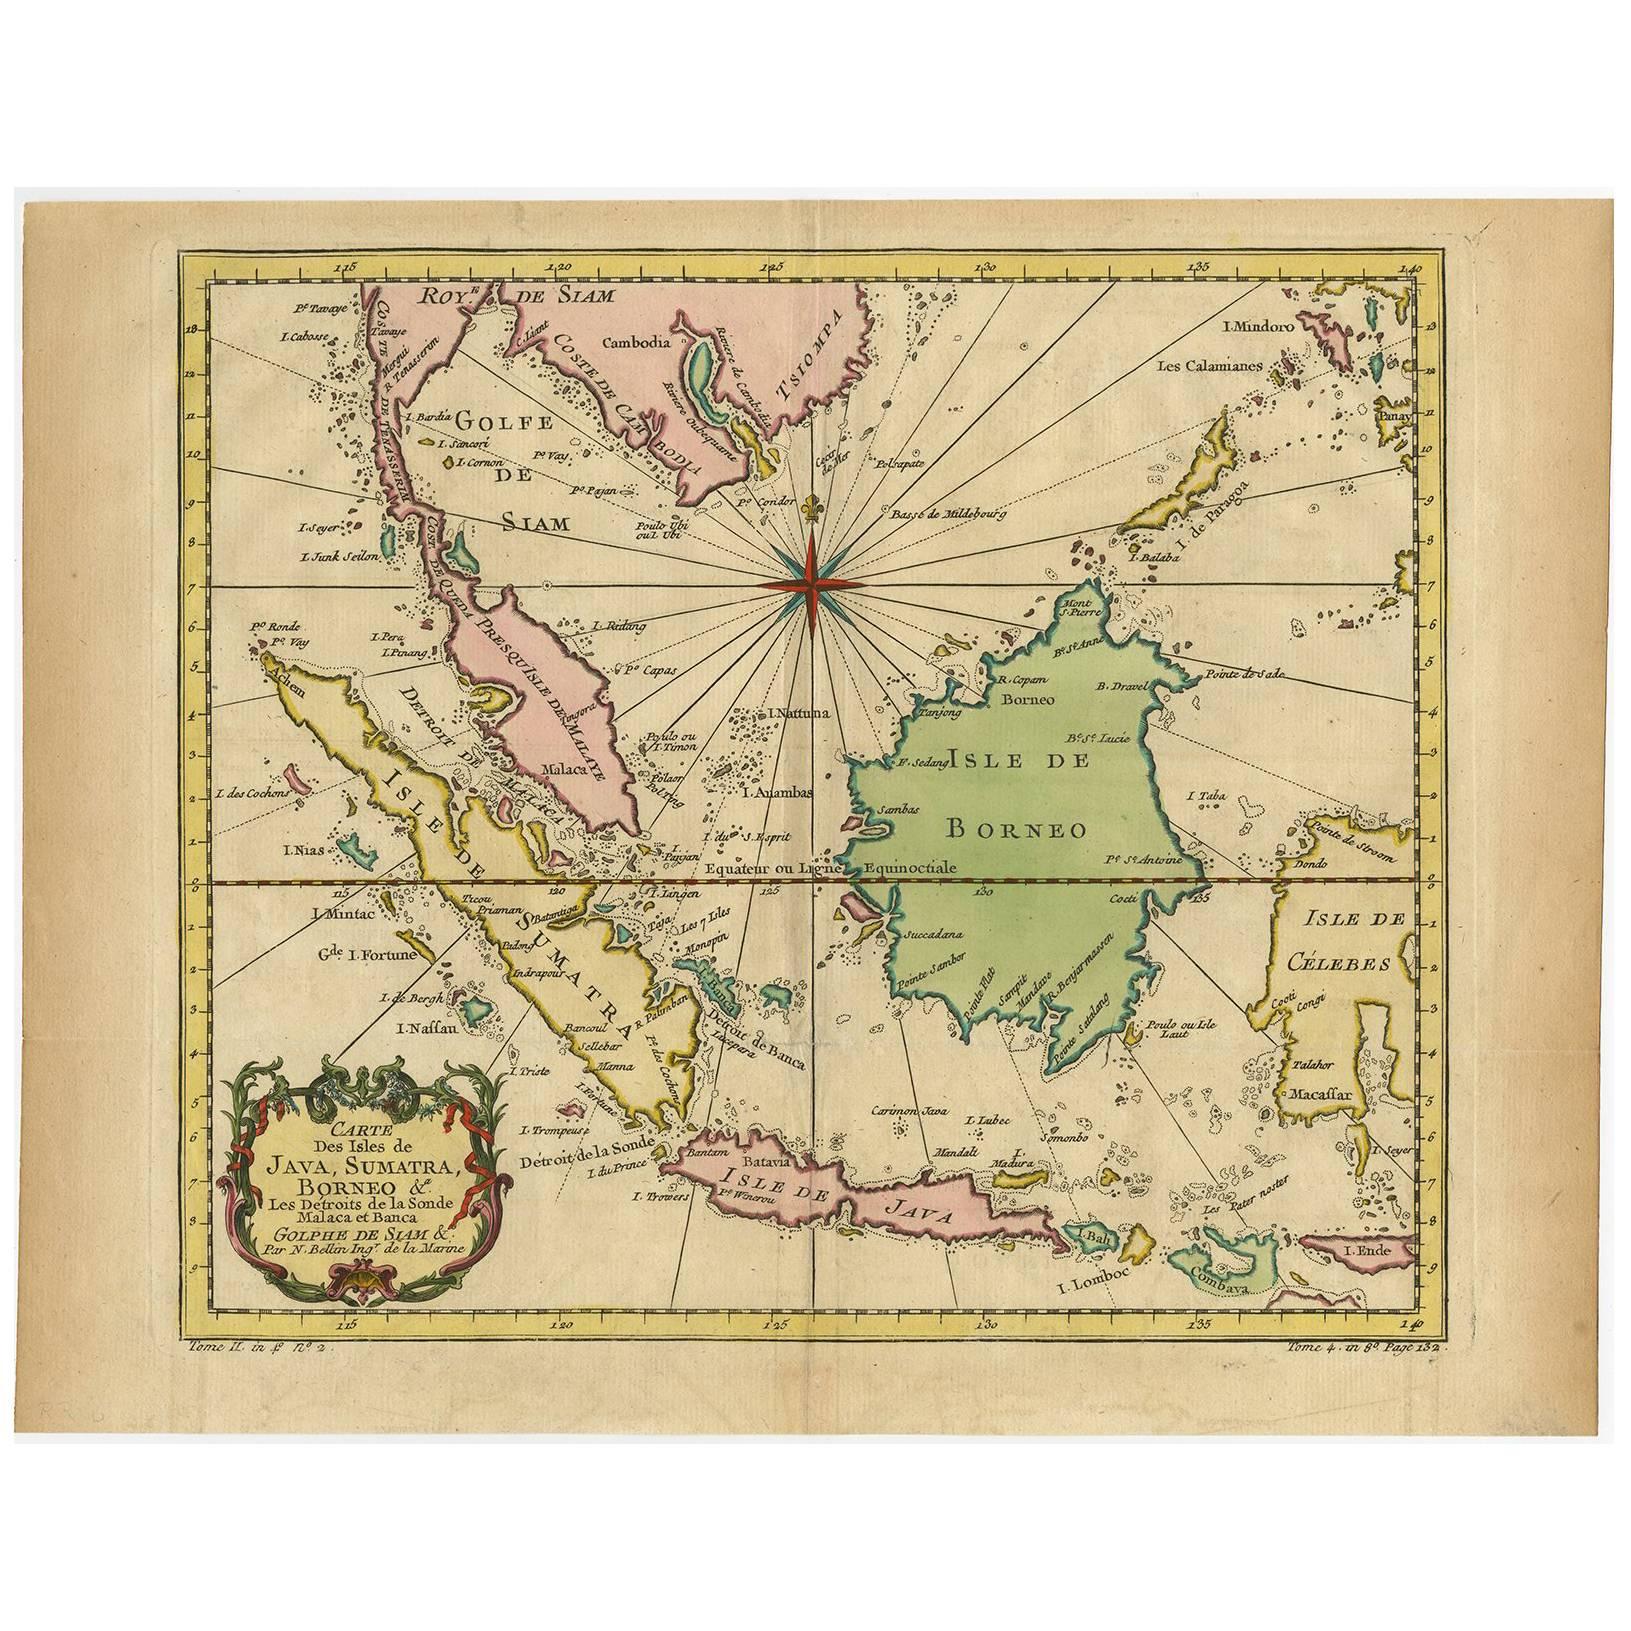 Antique Map of South East Asia by J.N. Bellin, 1757